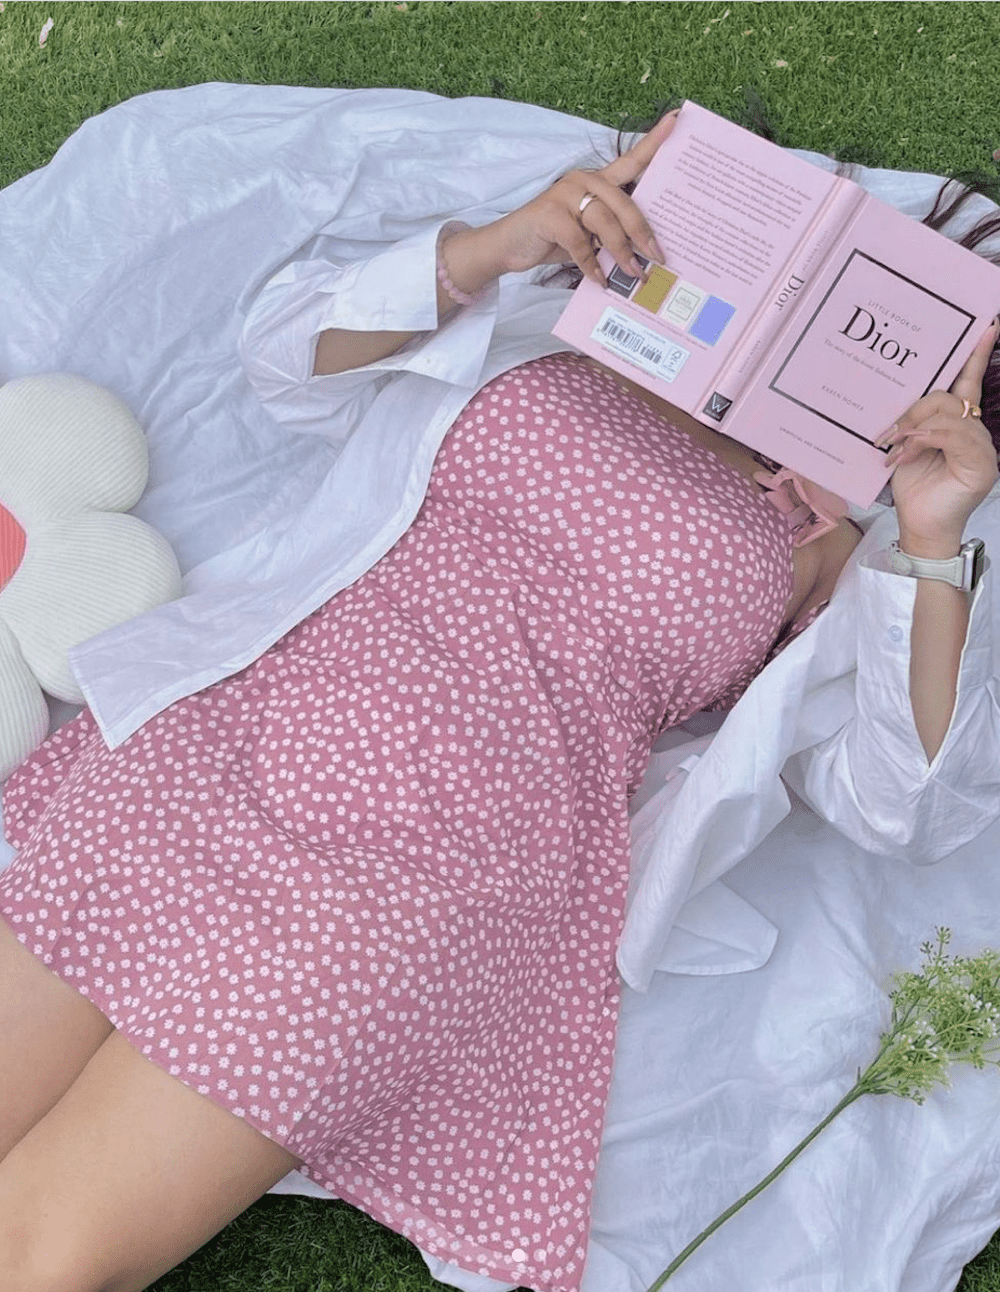 image of a woman laying on a blanket wearing a pink dress reading a pink book